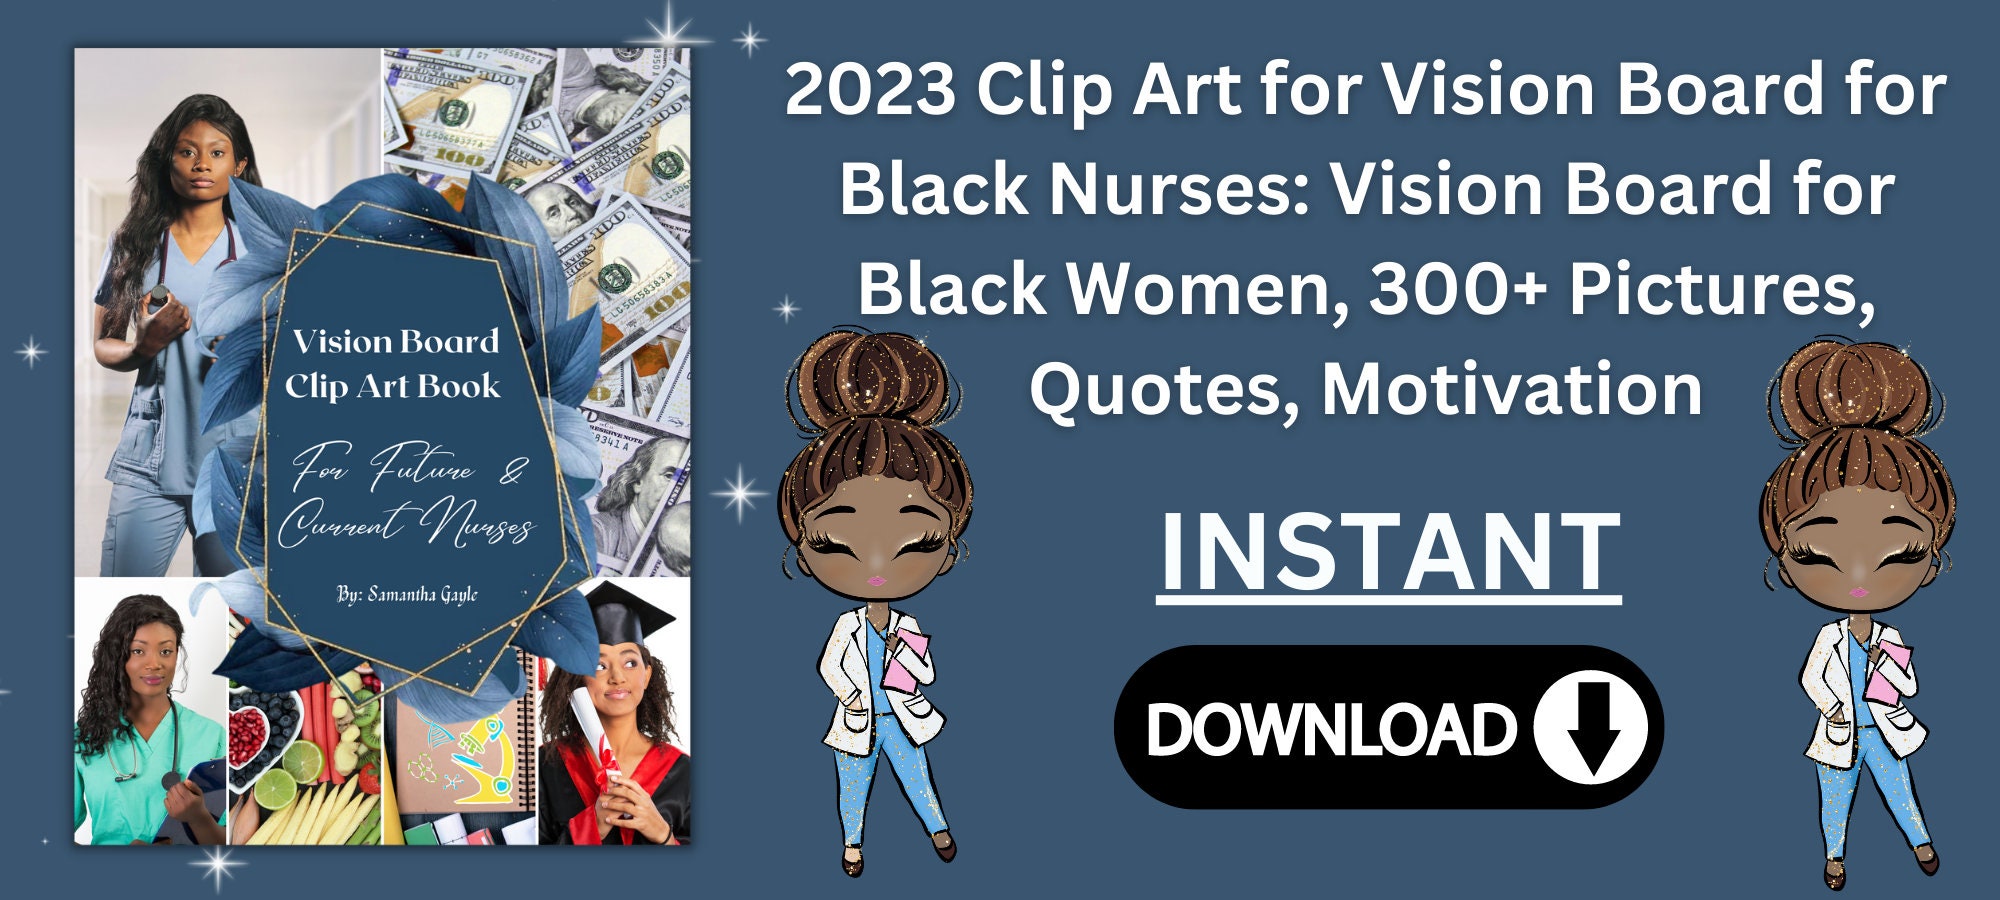 2024 Vision Board Clip Art Book for Black Women: Create Motivational & Powerful Vision Board from 300+ Vision Board Supplies (Pictures, Quotes and